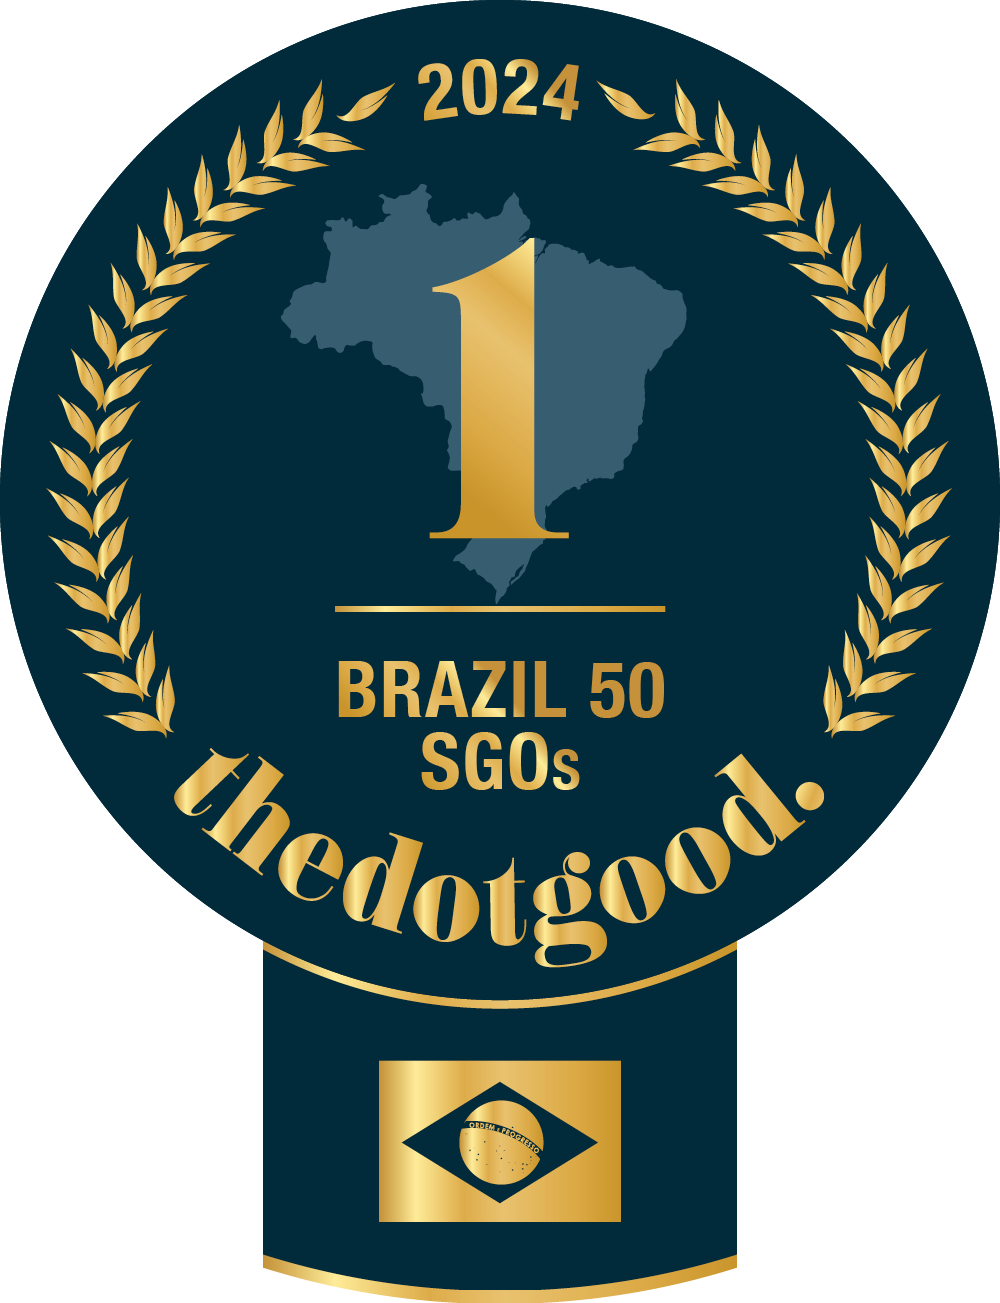 CIEDS is brazil ranked on thedotgood.